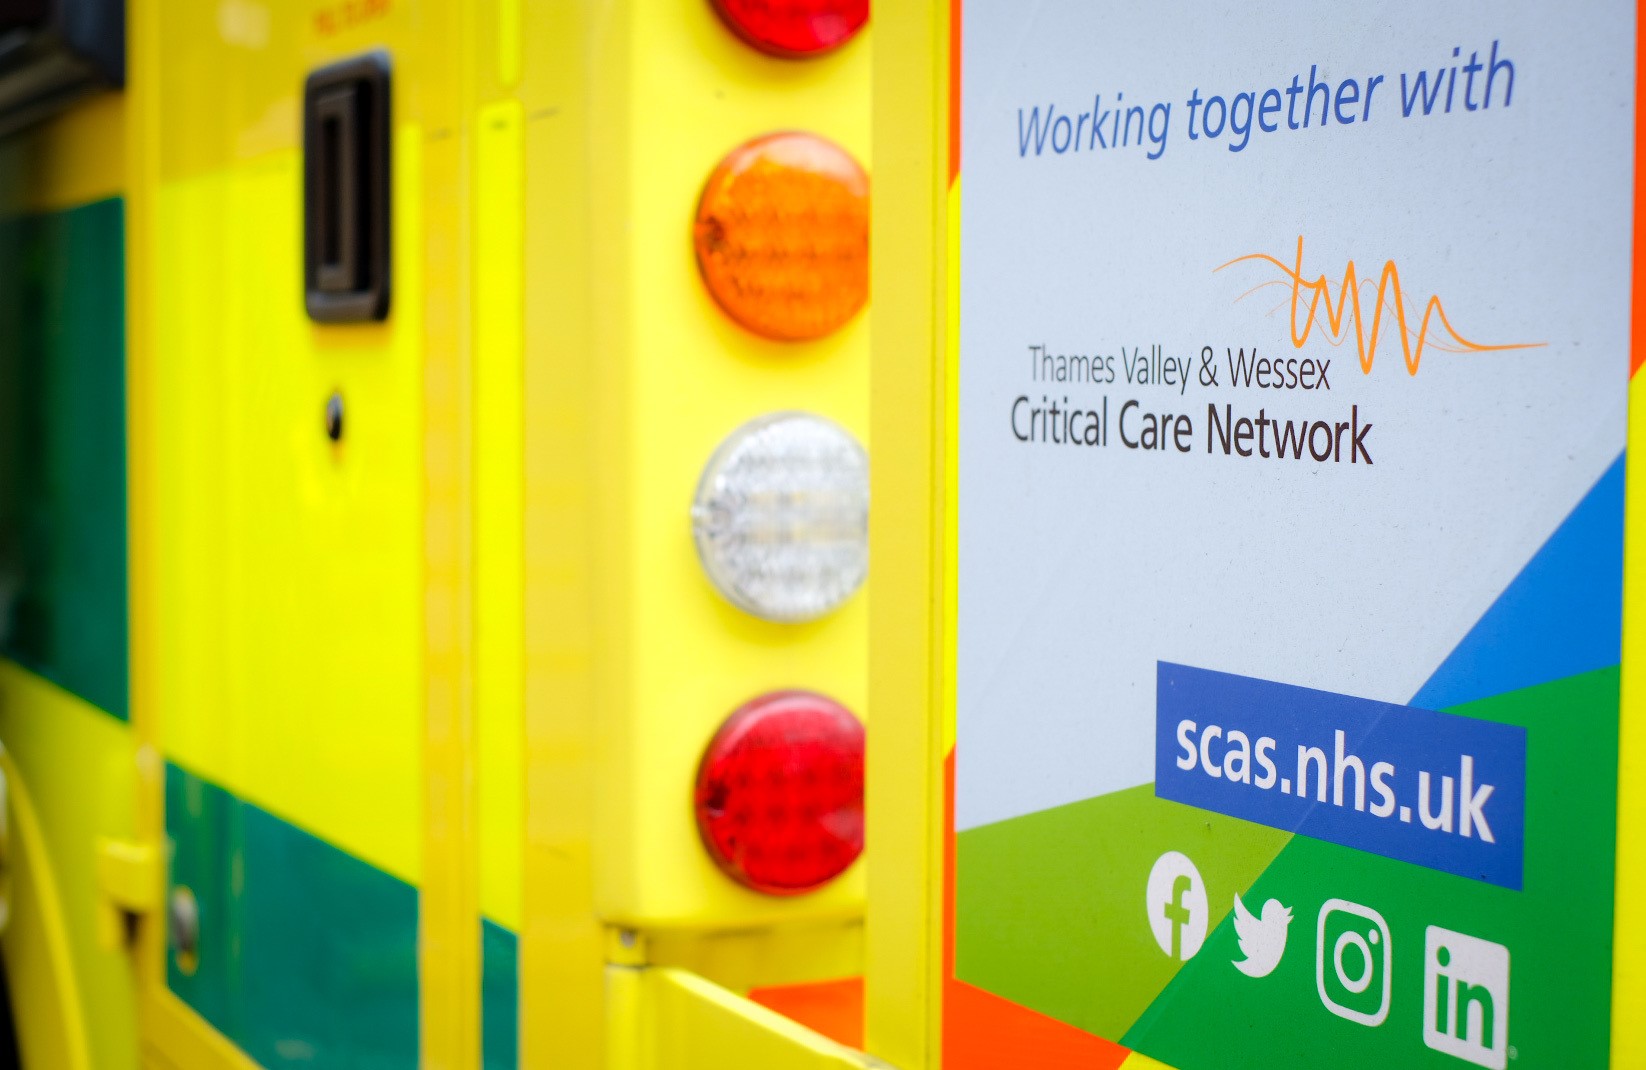 Ambulance with Thames Valley and Wessex Adult Critical Care Network logo